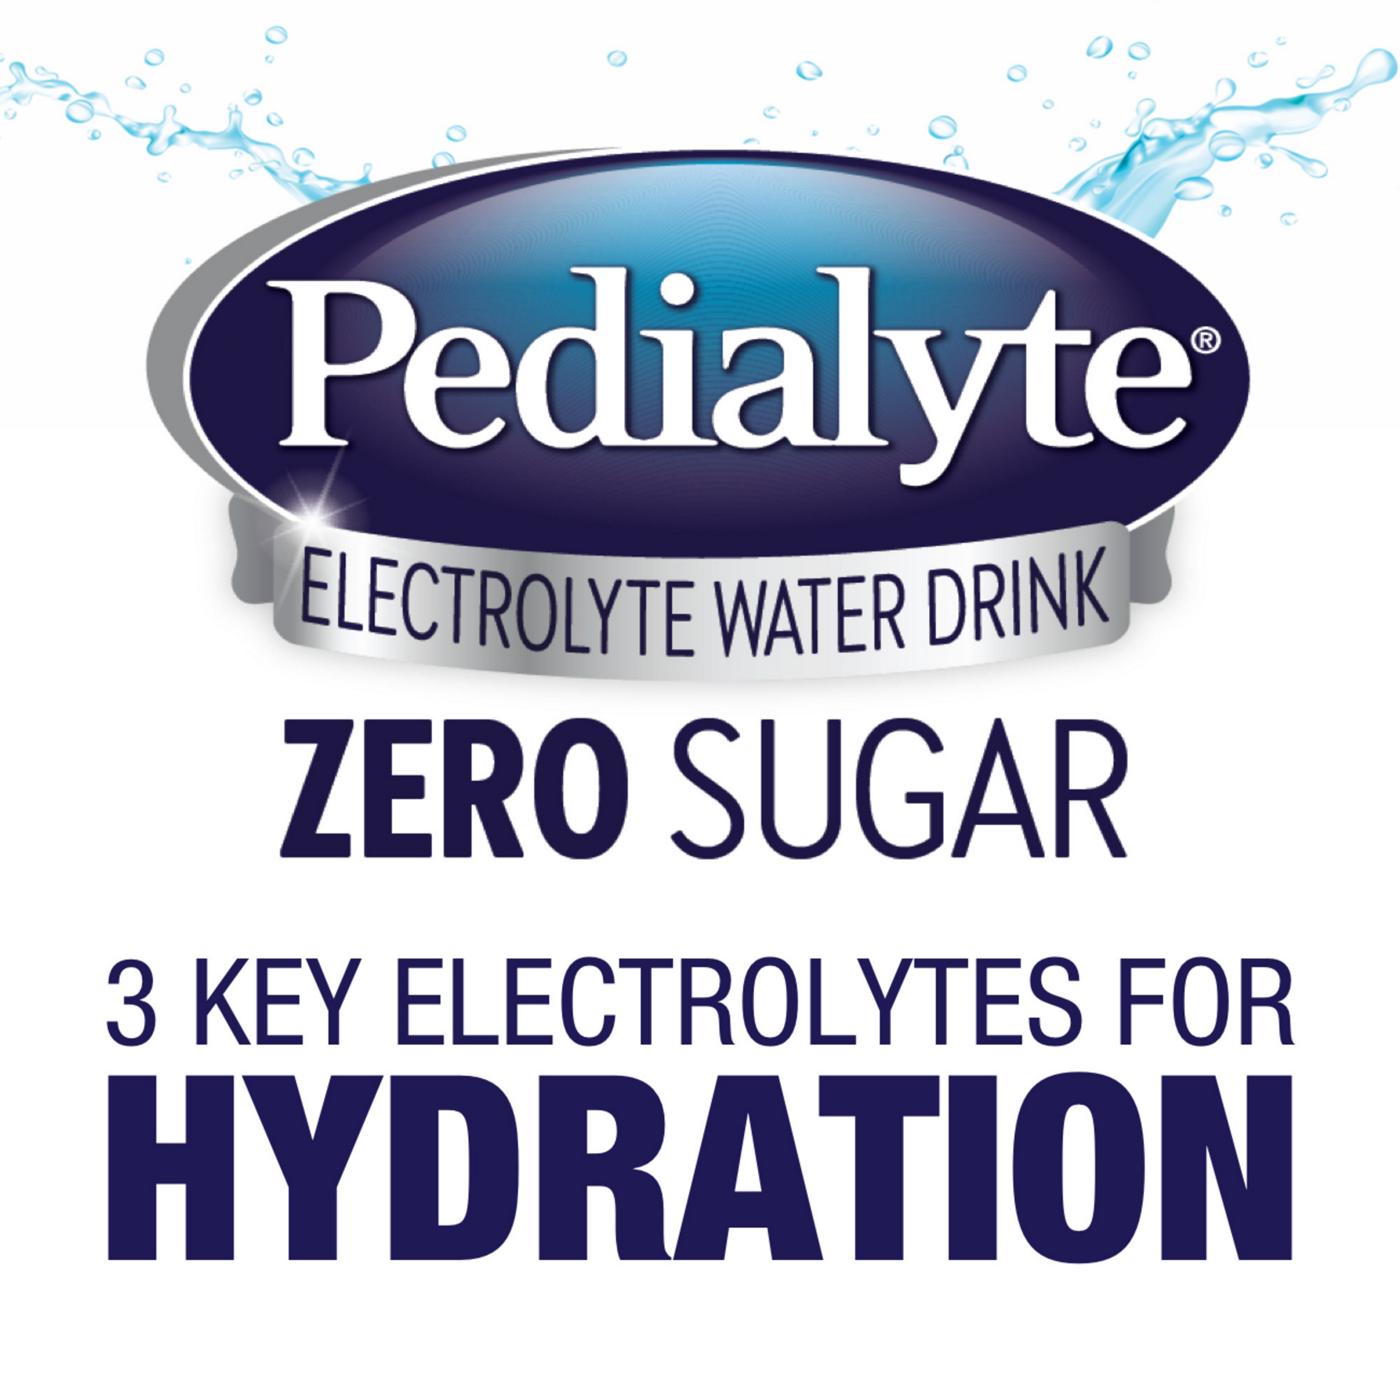 Pedialyte Zero Sugar Electrolyte Water Drink - Berry Frost; image 8 of 9